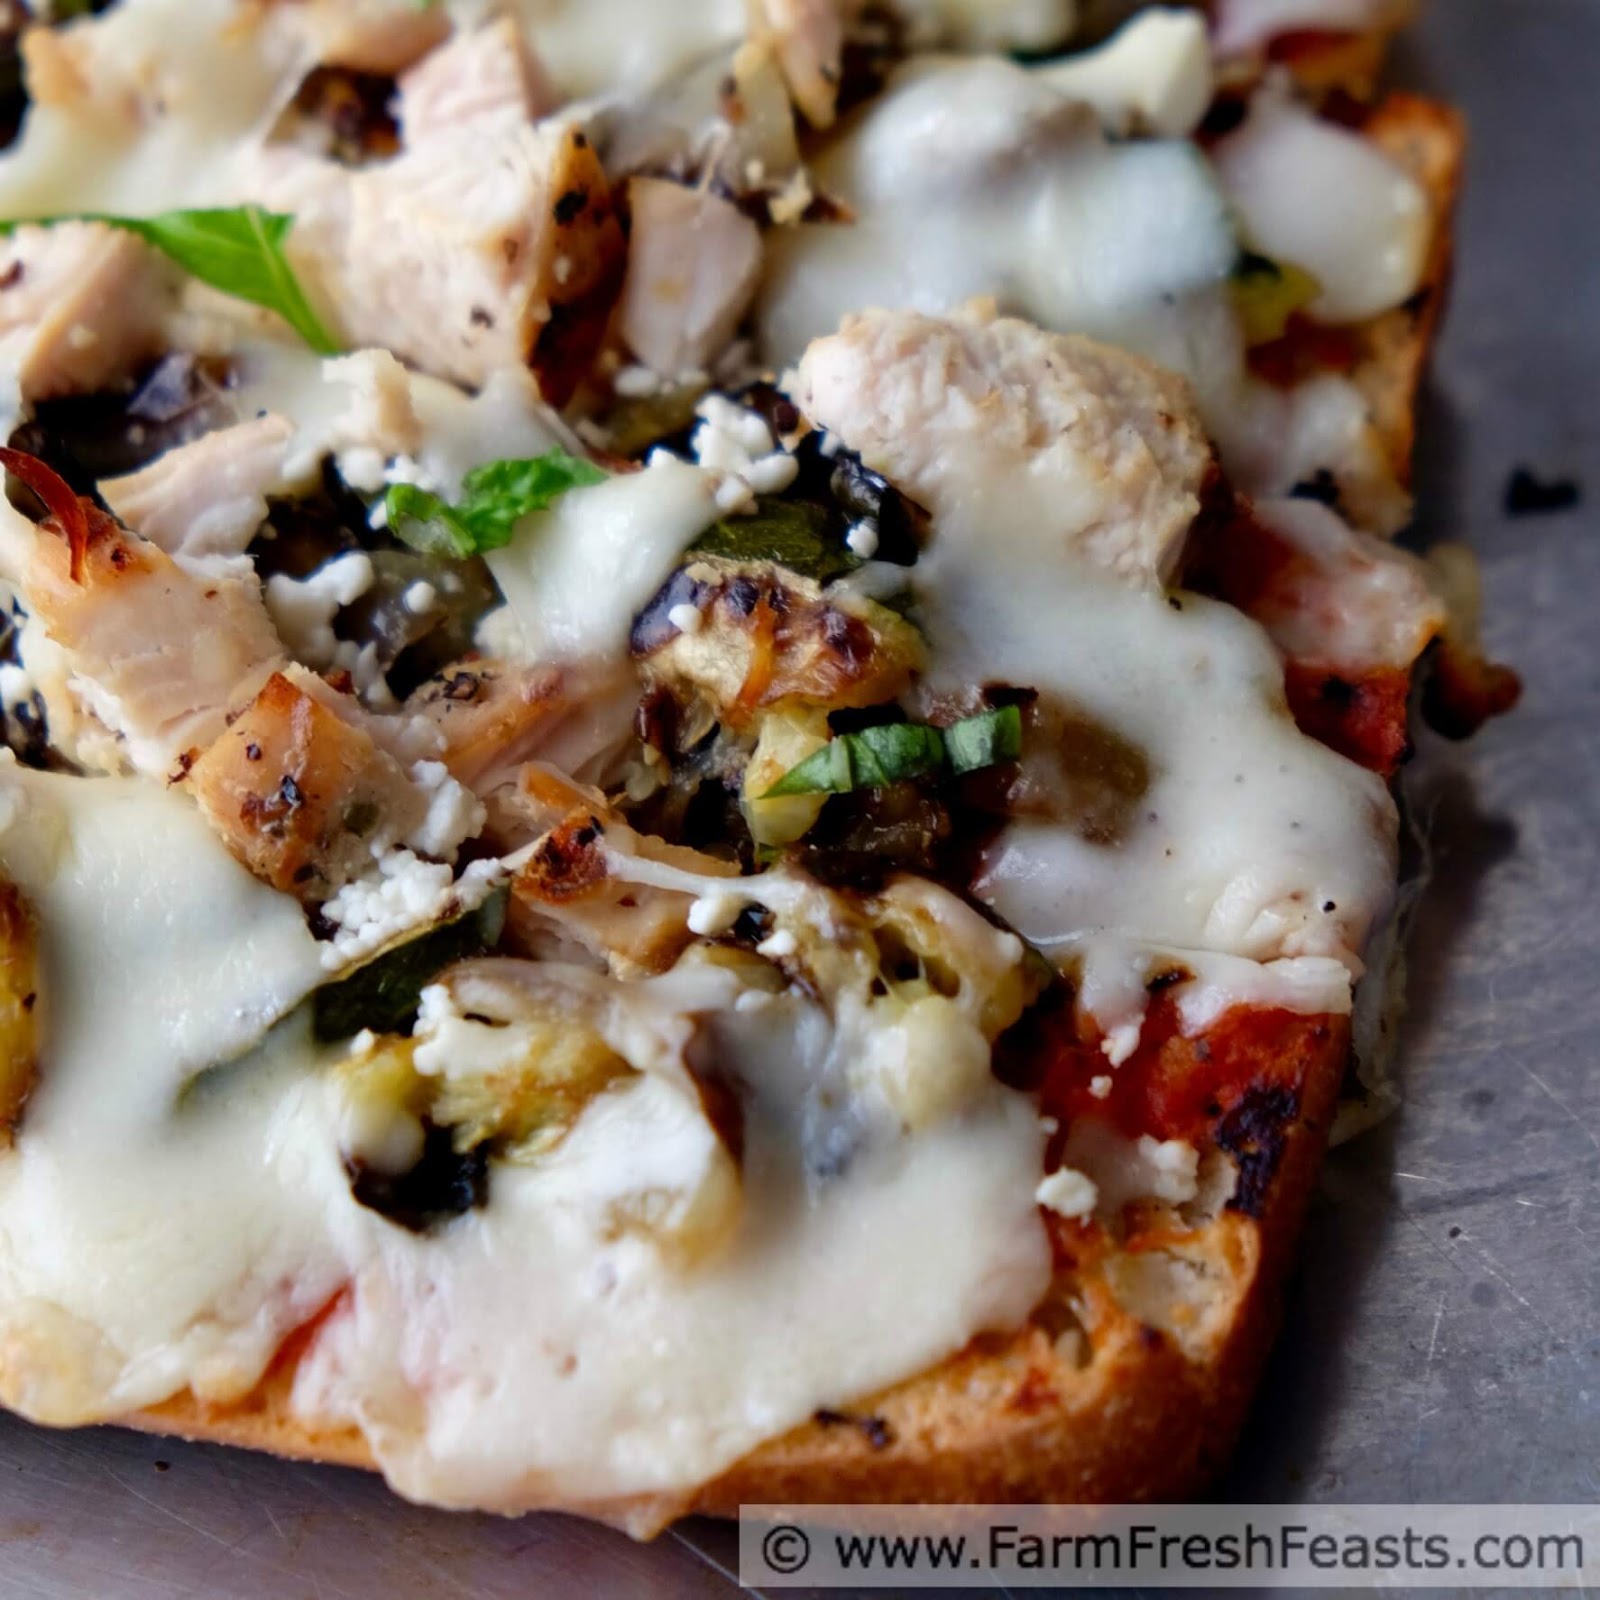 Farm Fresh Feasts: Grilled Ciabatta Pizza with Chicken and Vegetables